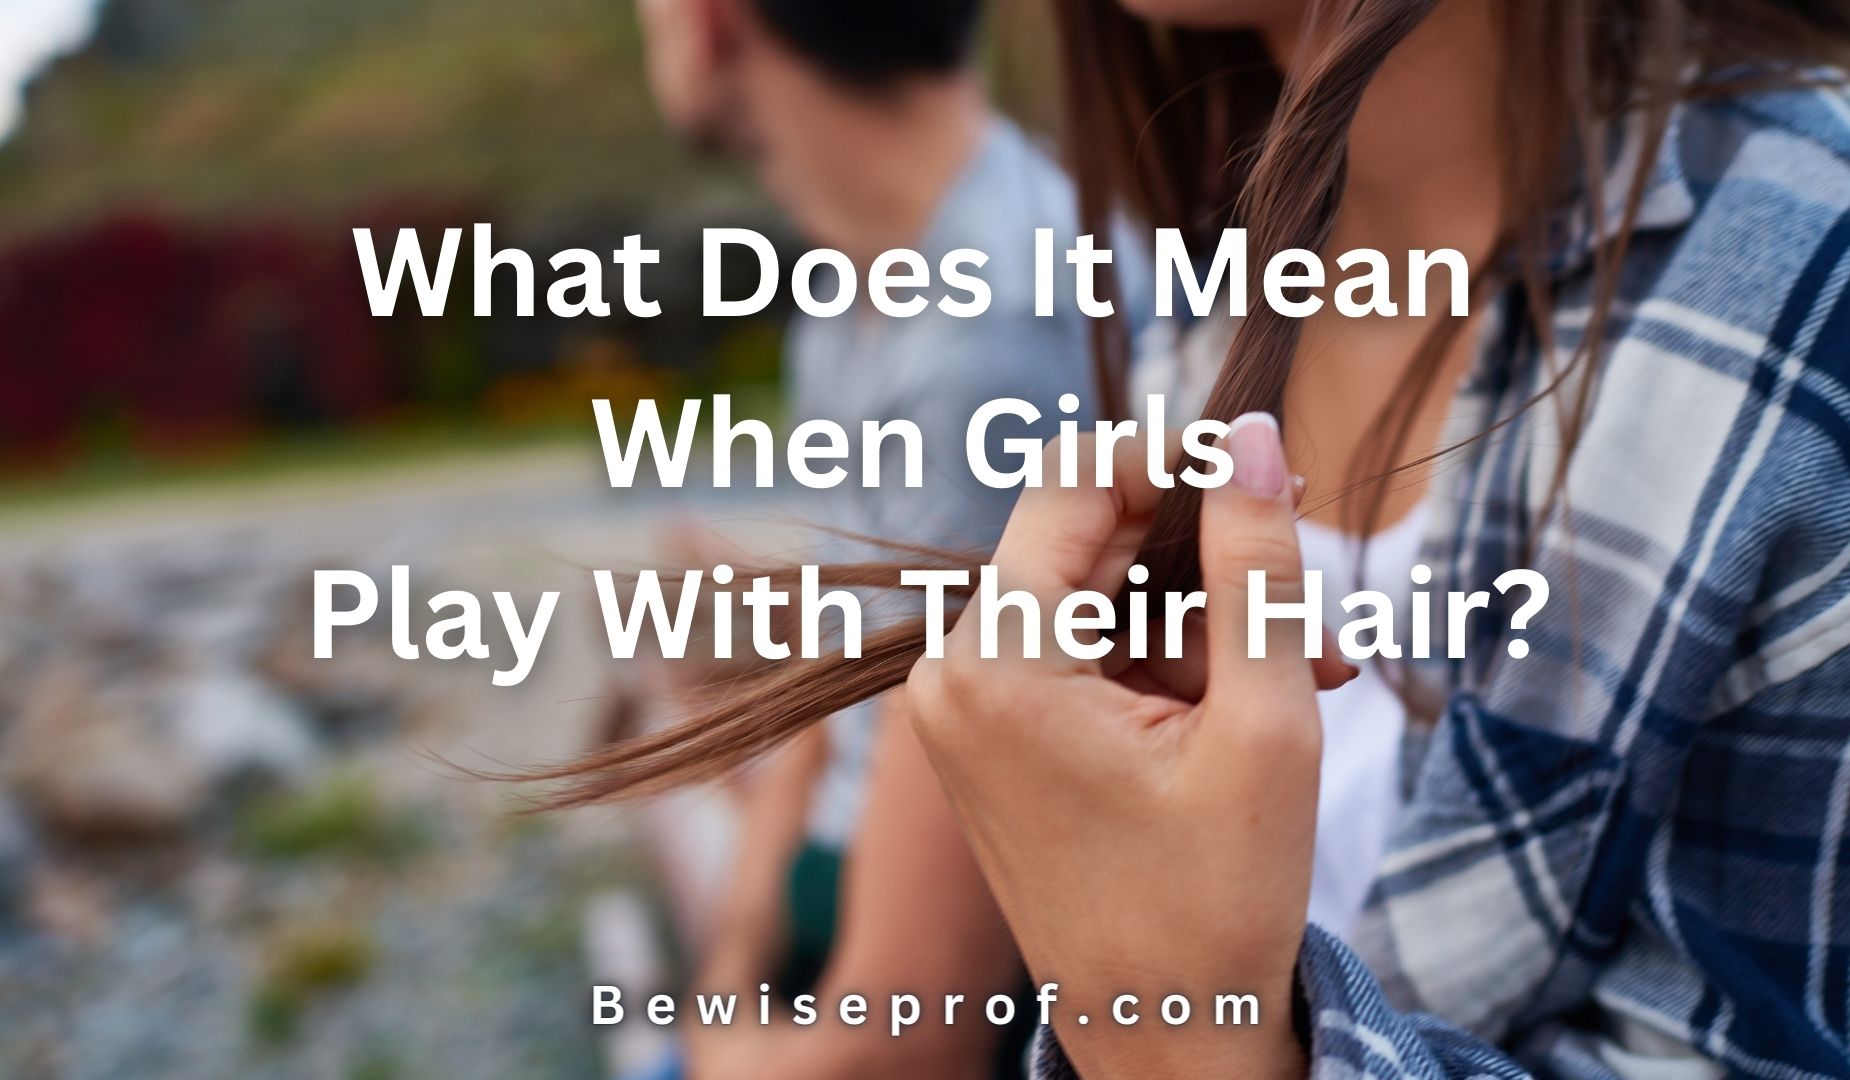 What Does It Mean When Girls Play With Their Hair?